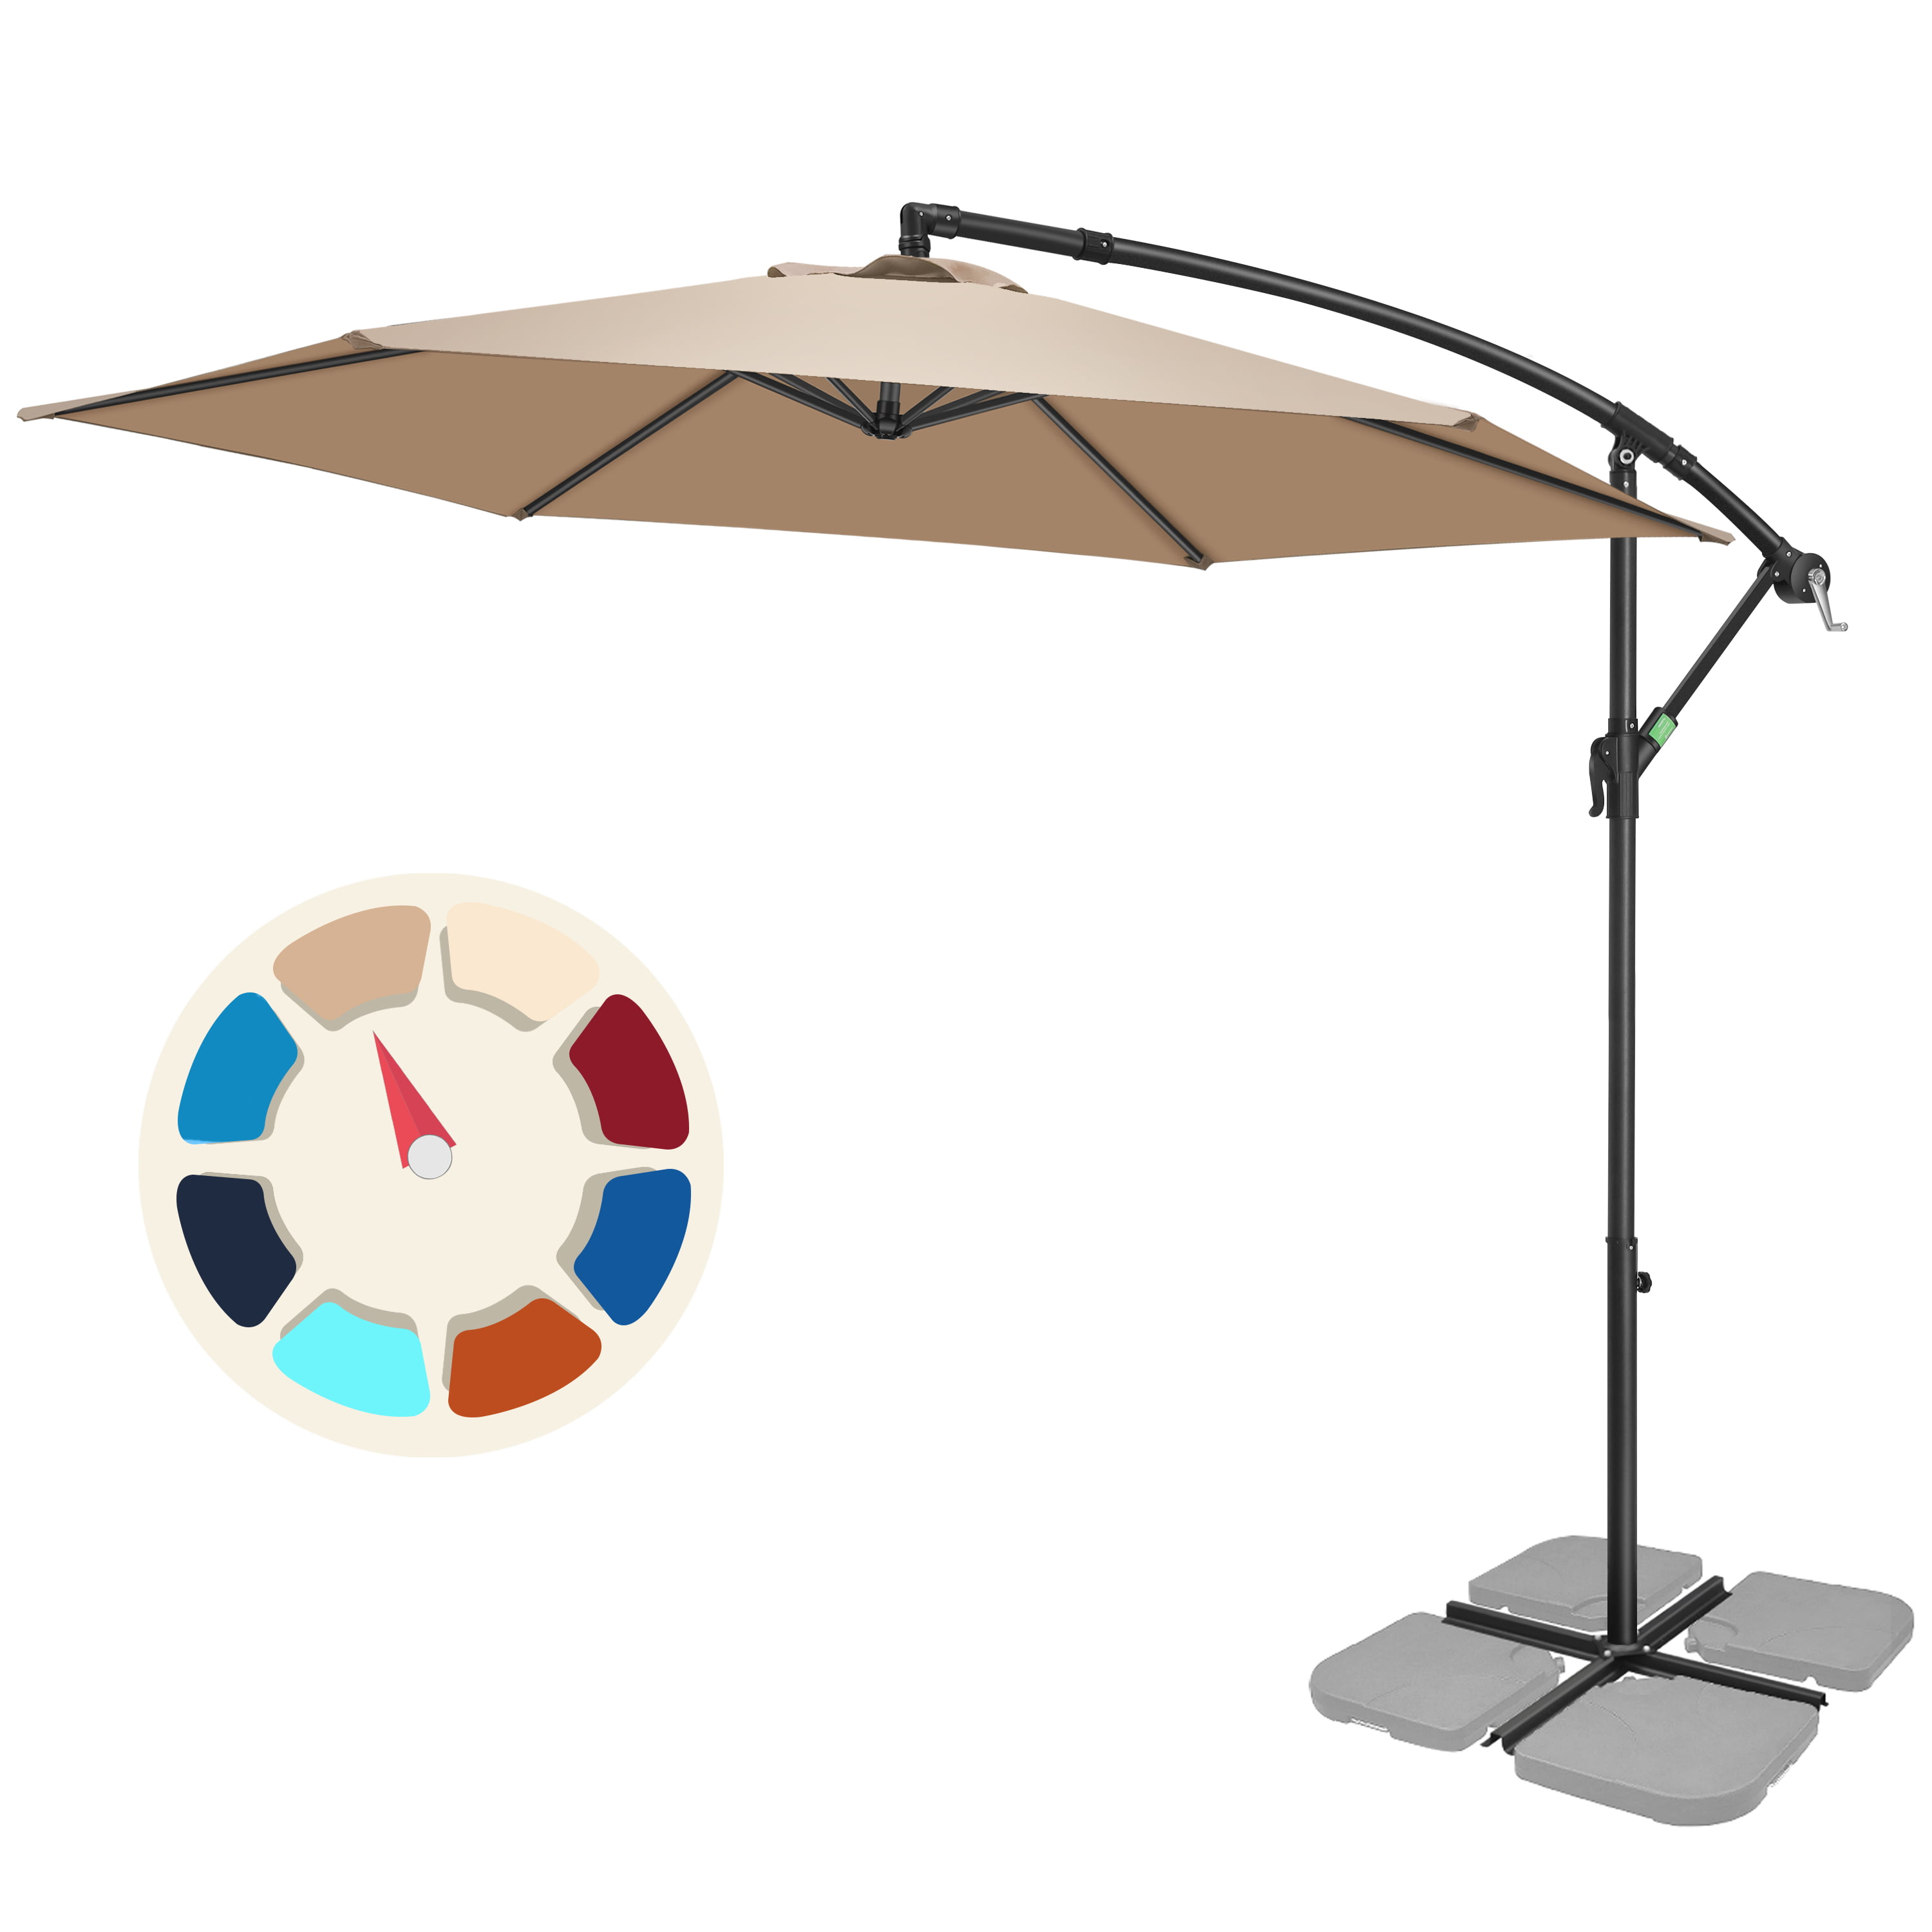 Choose the Best Patio Umbrella With These Expert Tips 